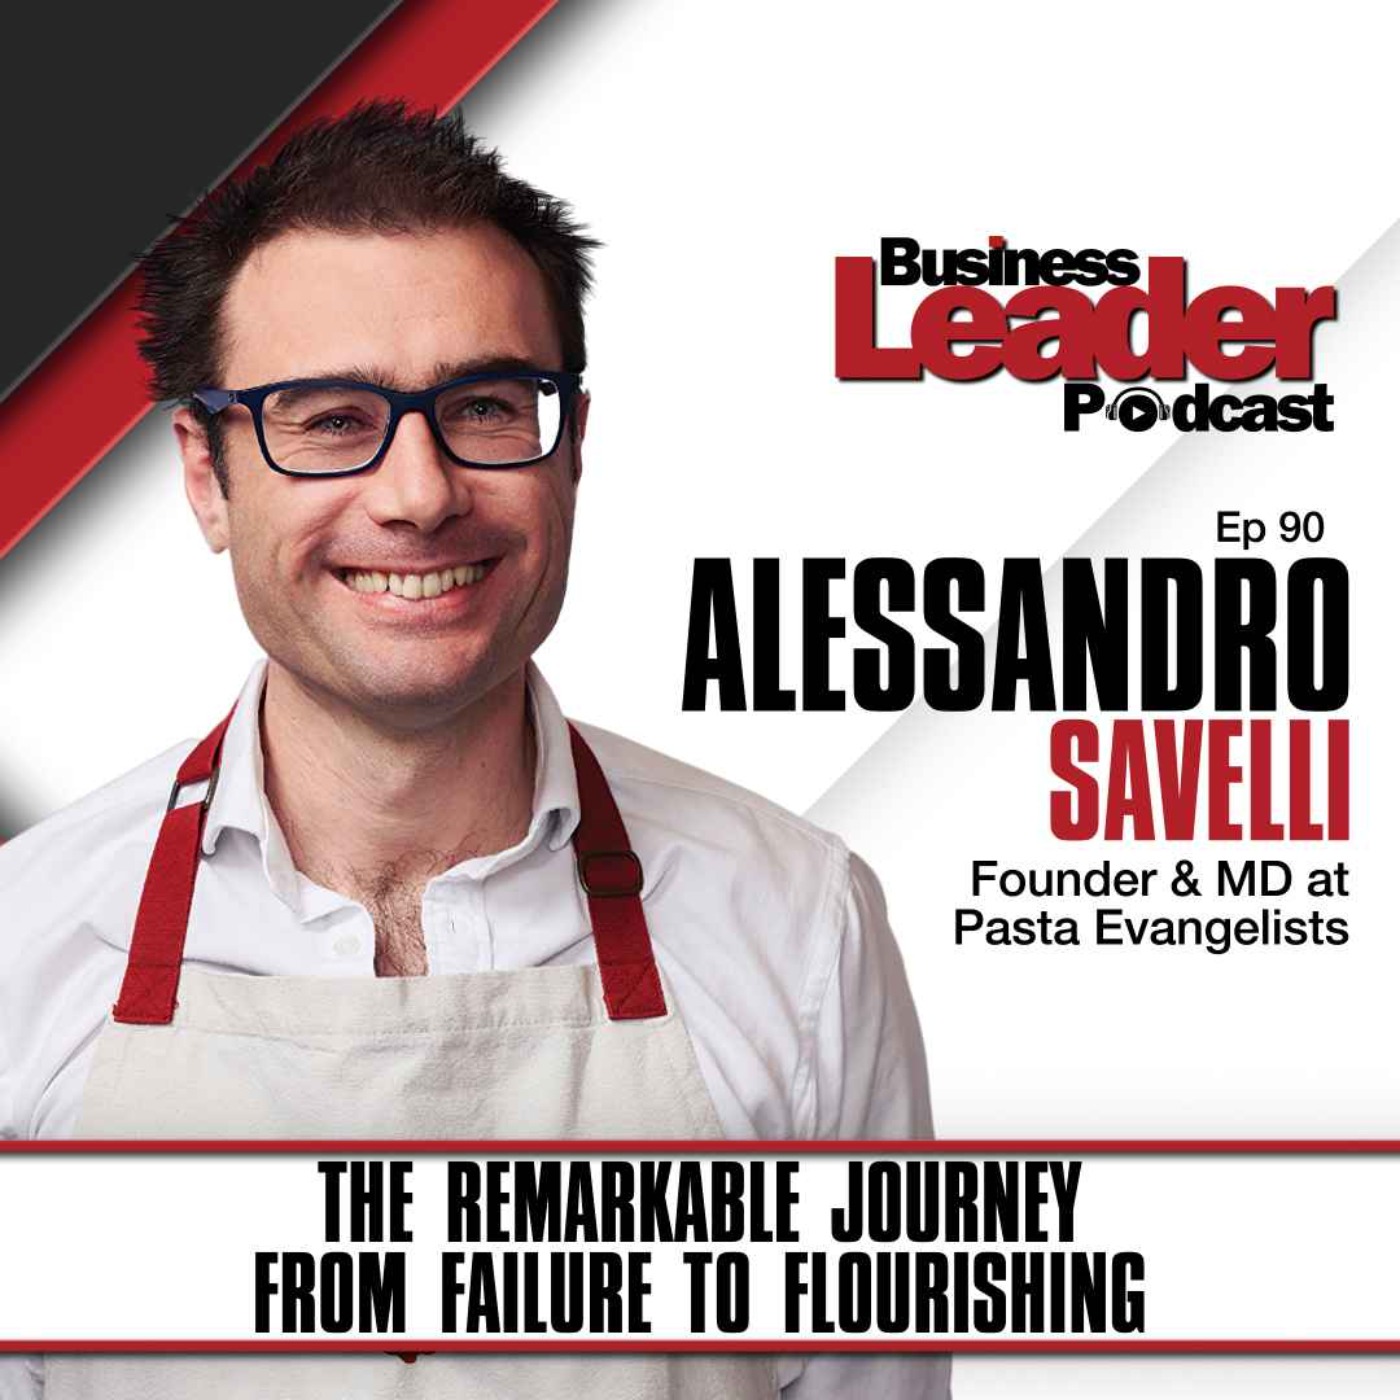 Alessandro Savelli: The remarkable journey from failure to flourishing